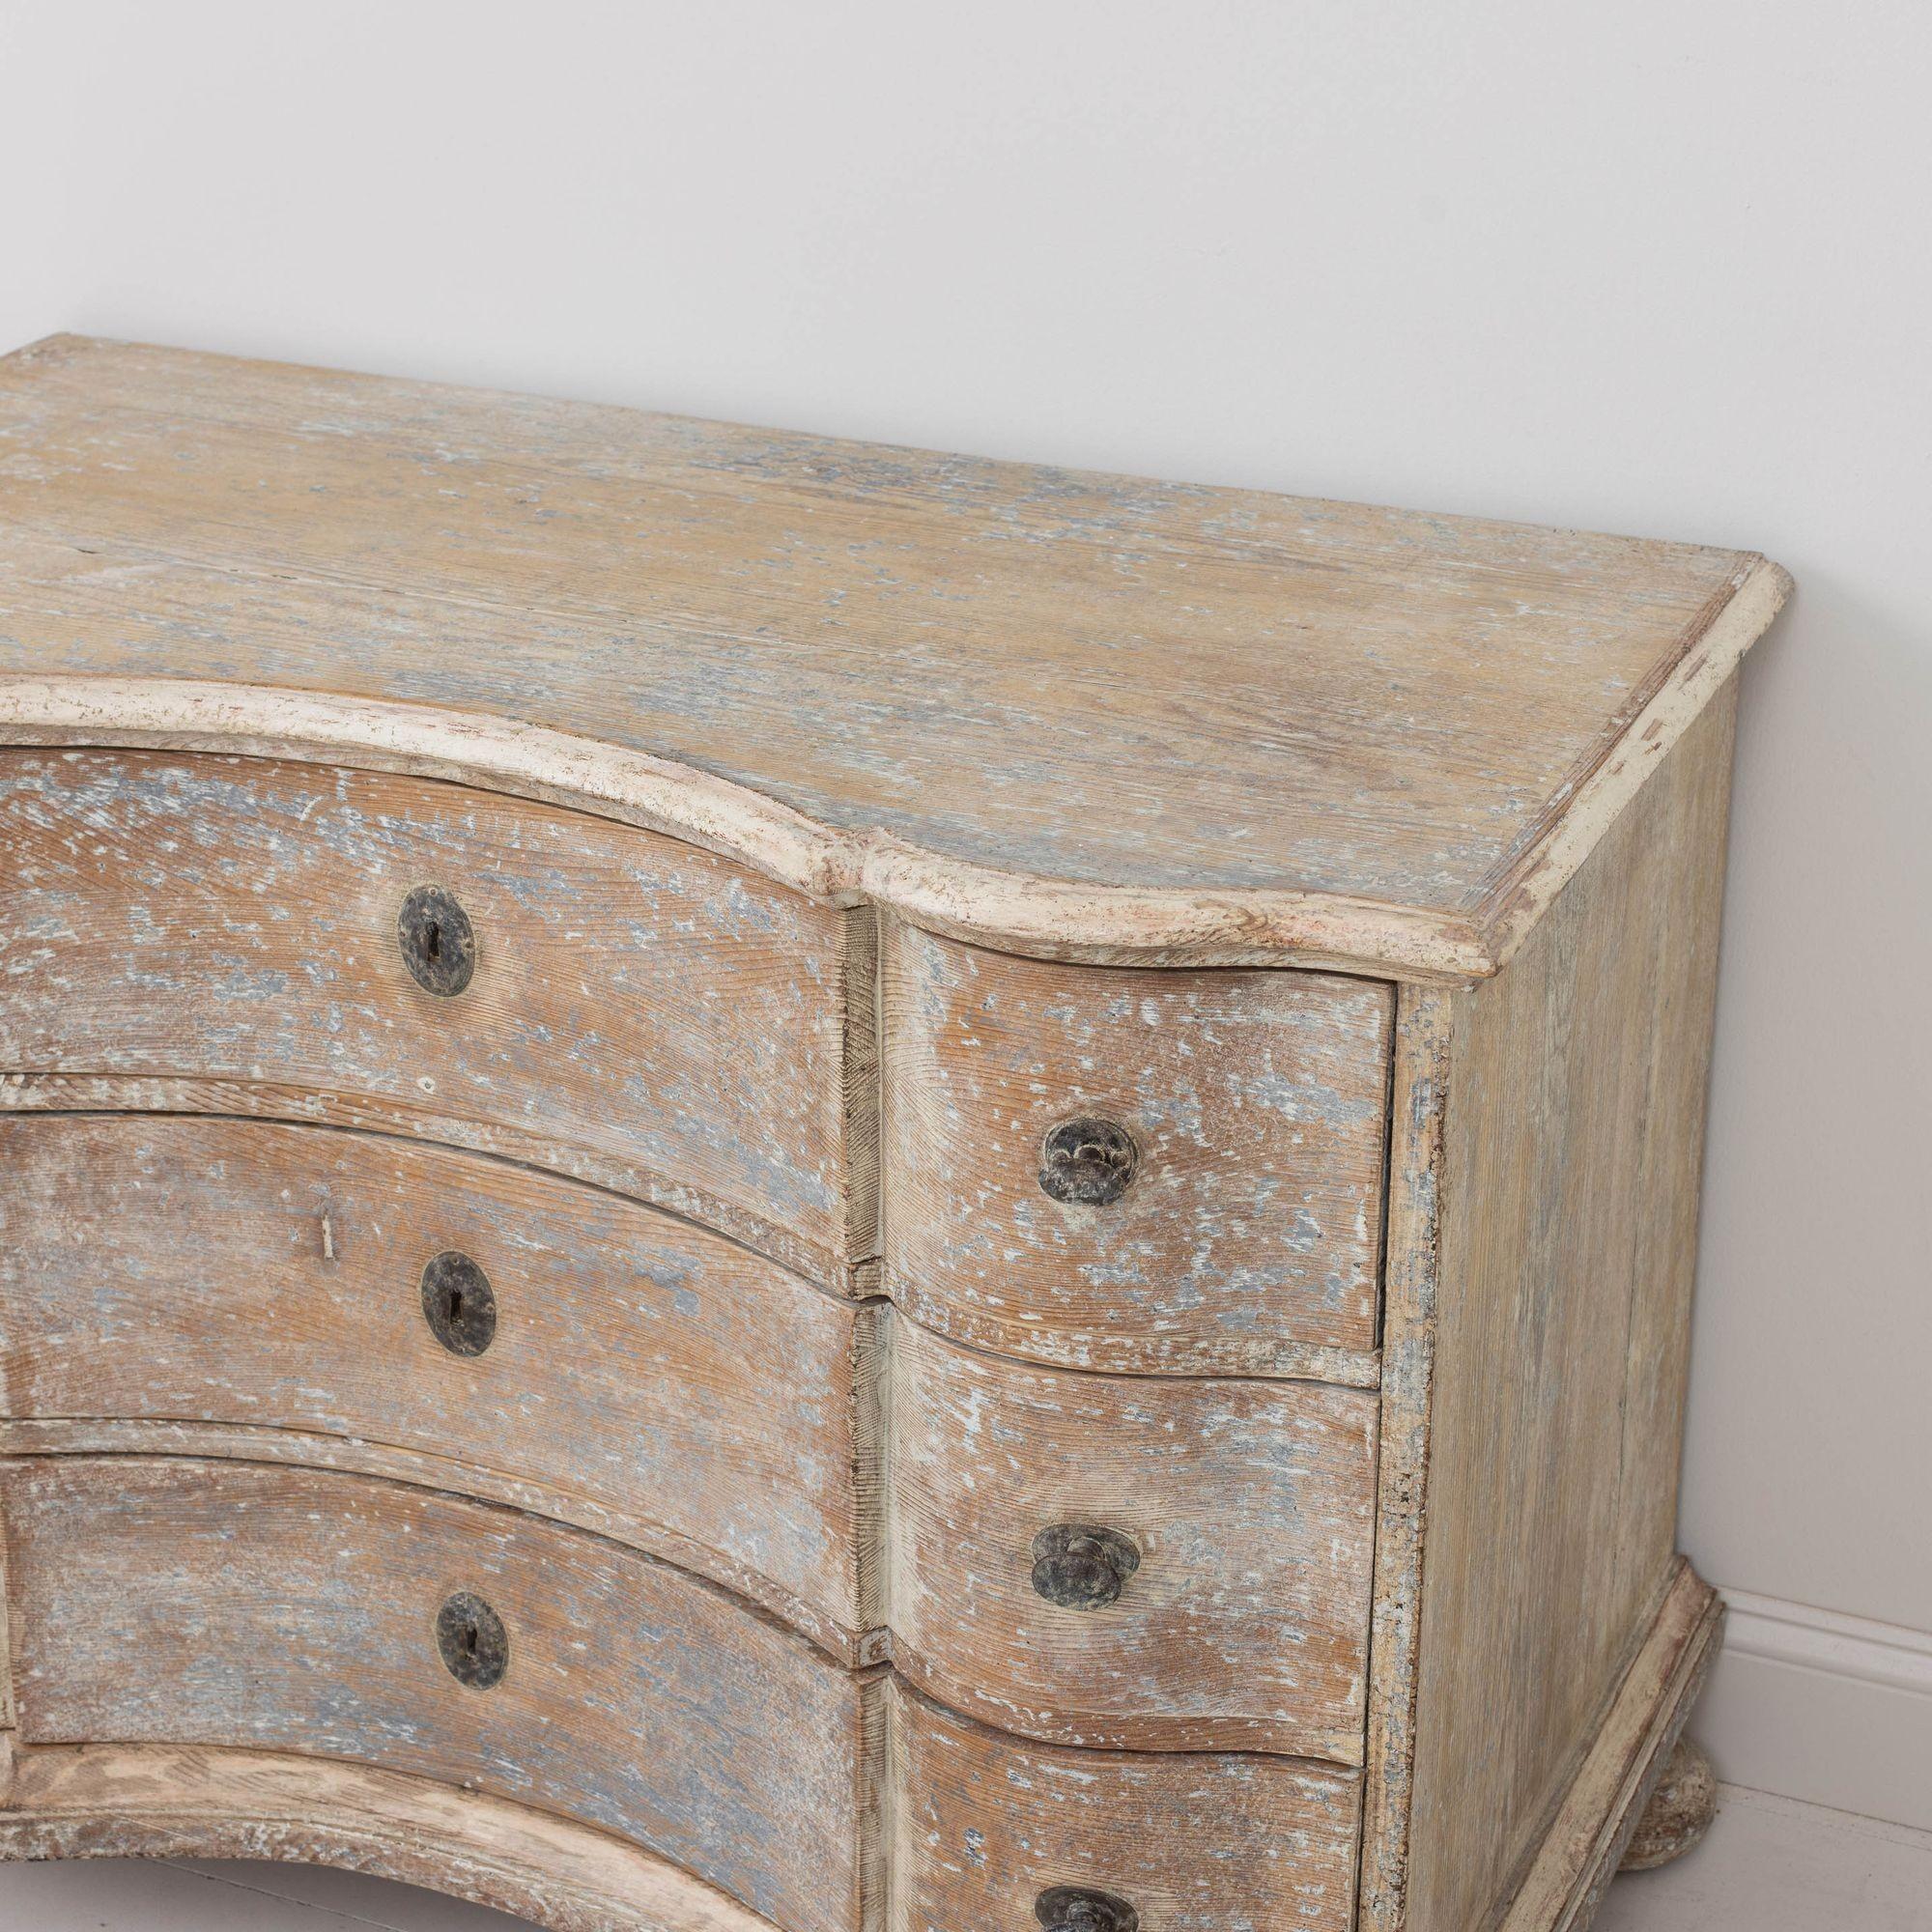 18th c. German Baroque Commode in Original Patina with Arbalette Shaped Front For Sale 6